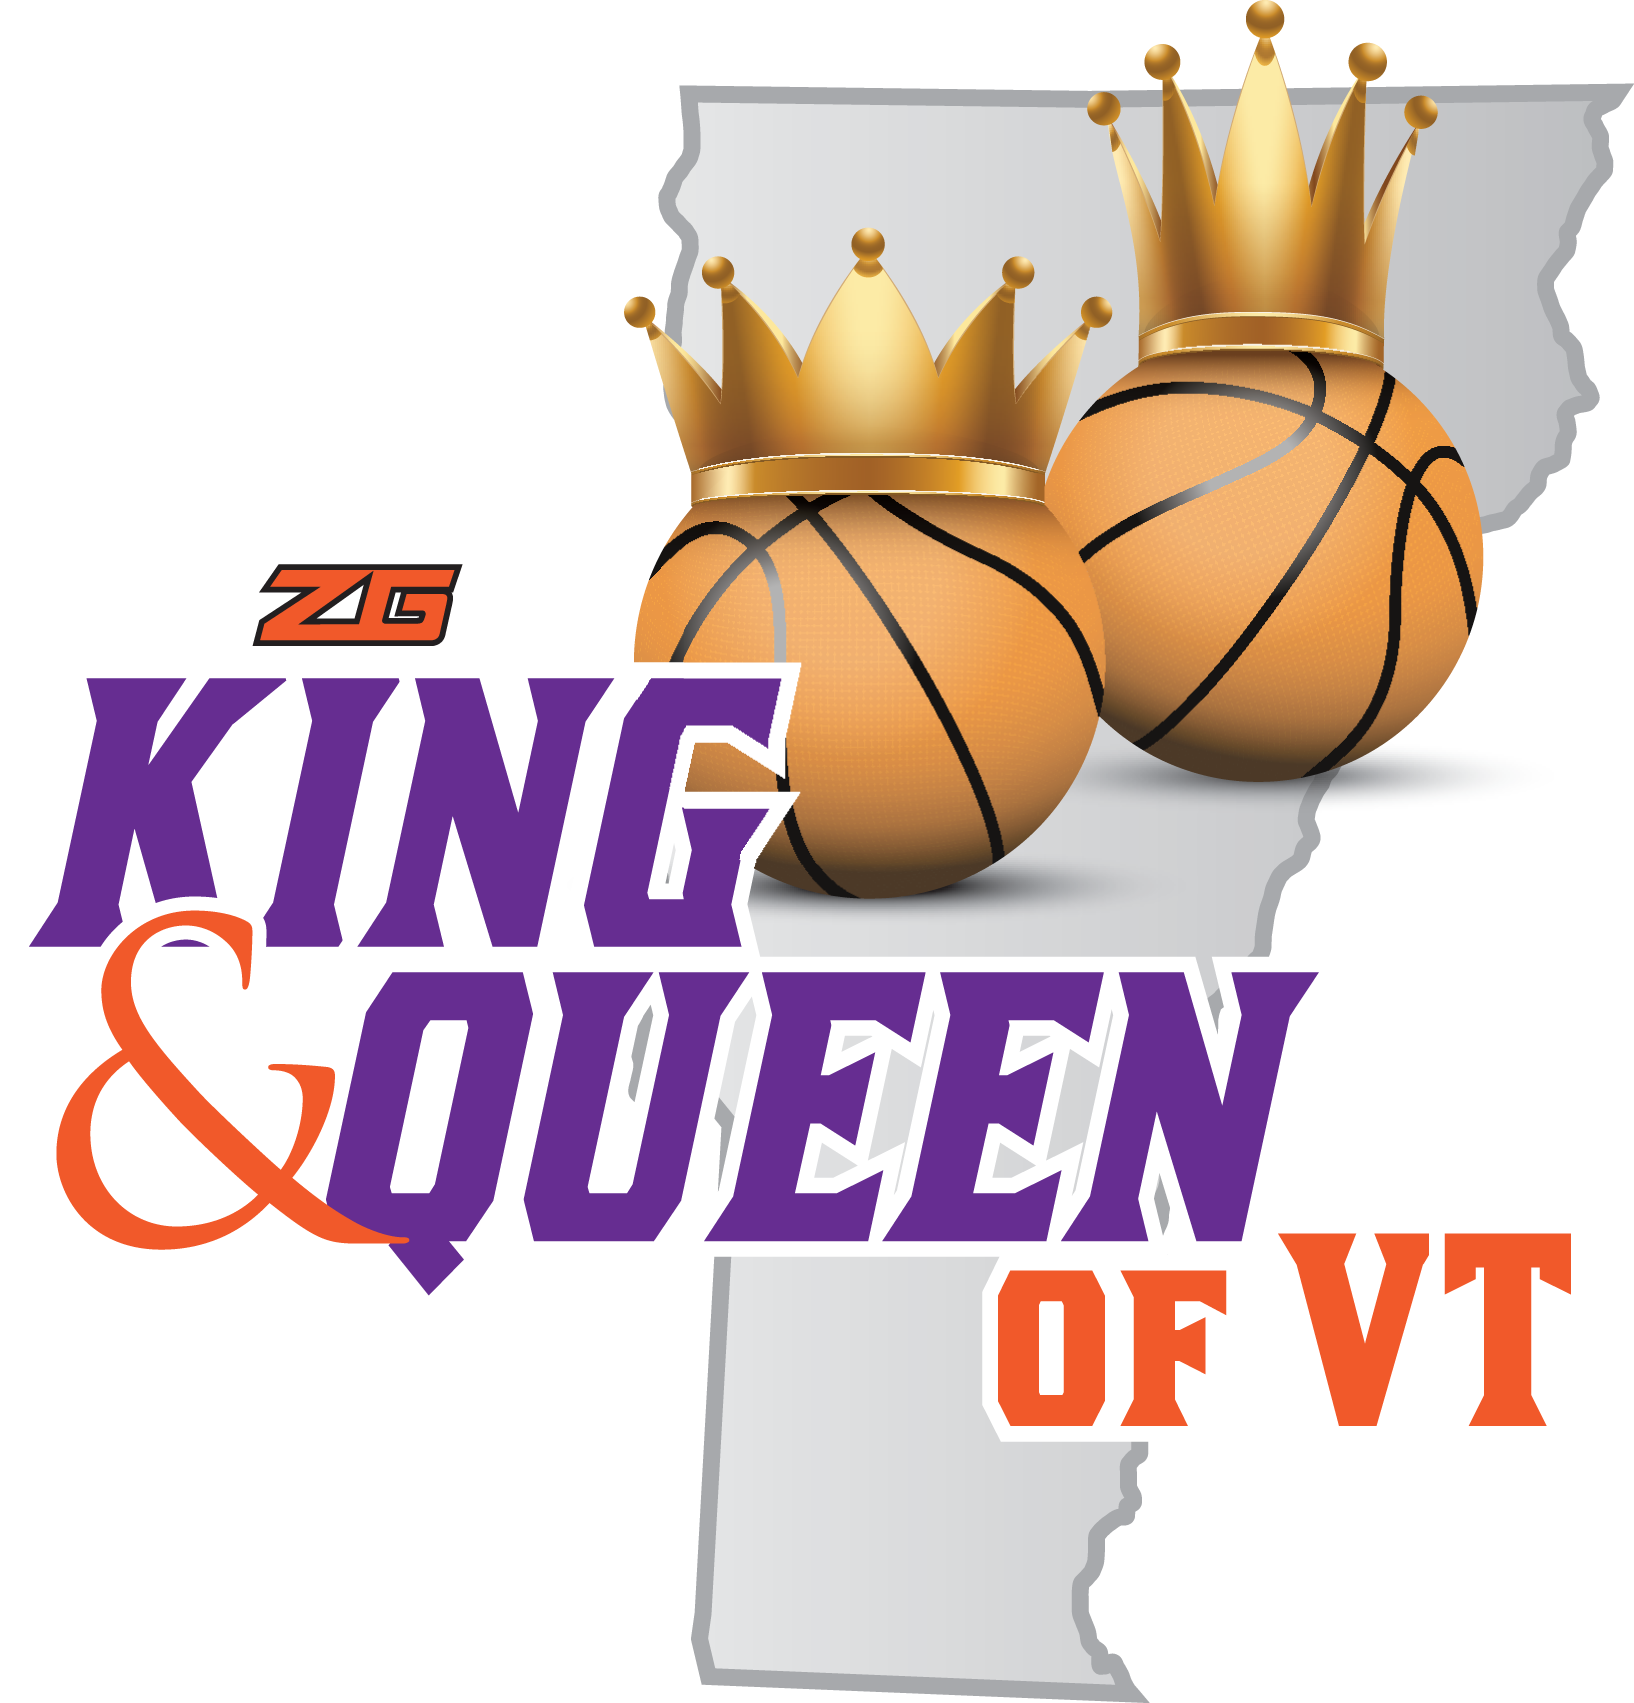 KING AND QUEEN OF VT